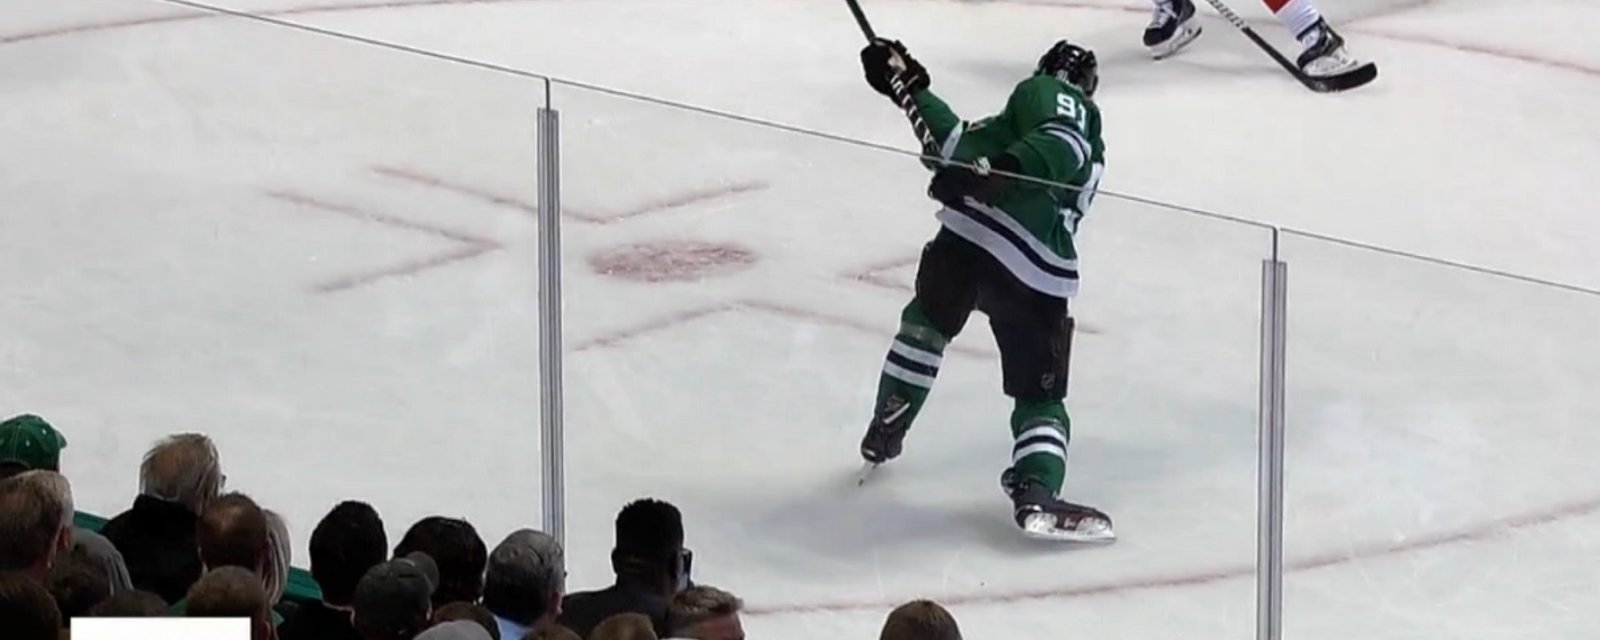 Tyler Seguin goes bar-down with a picture perfect shot. 